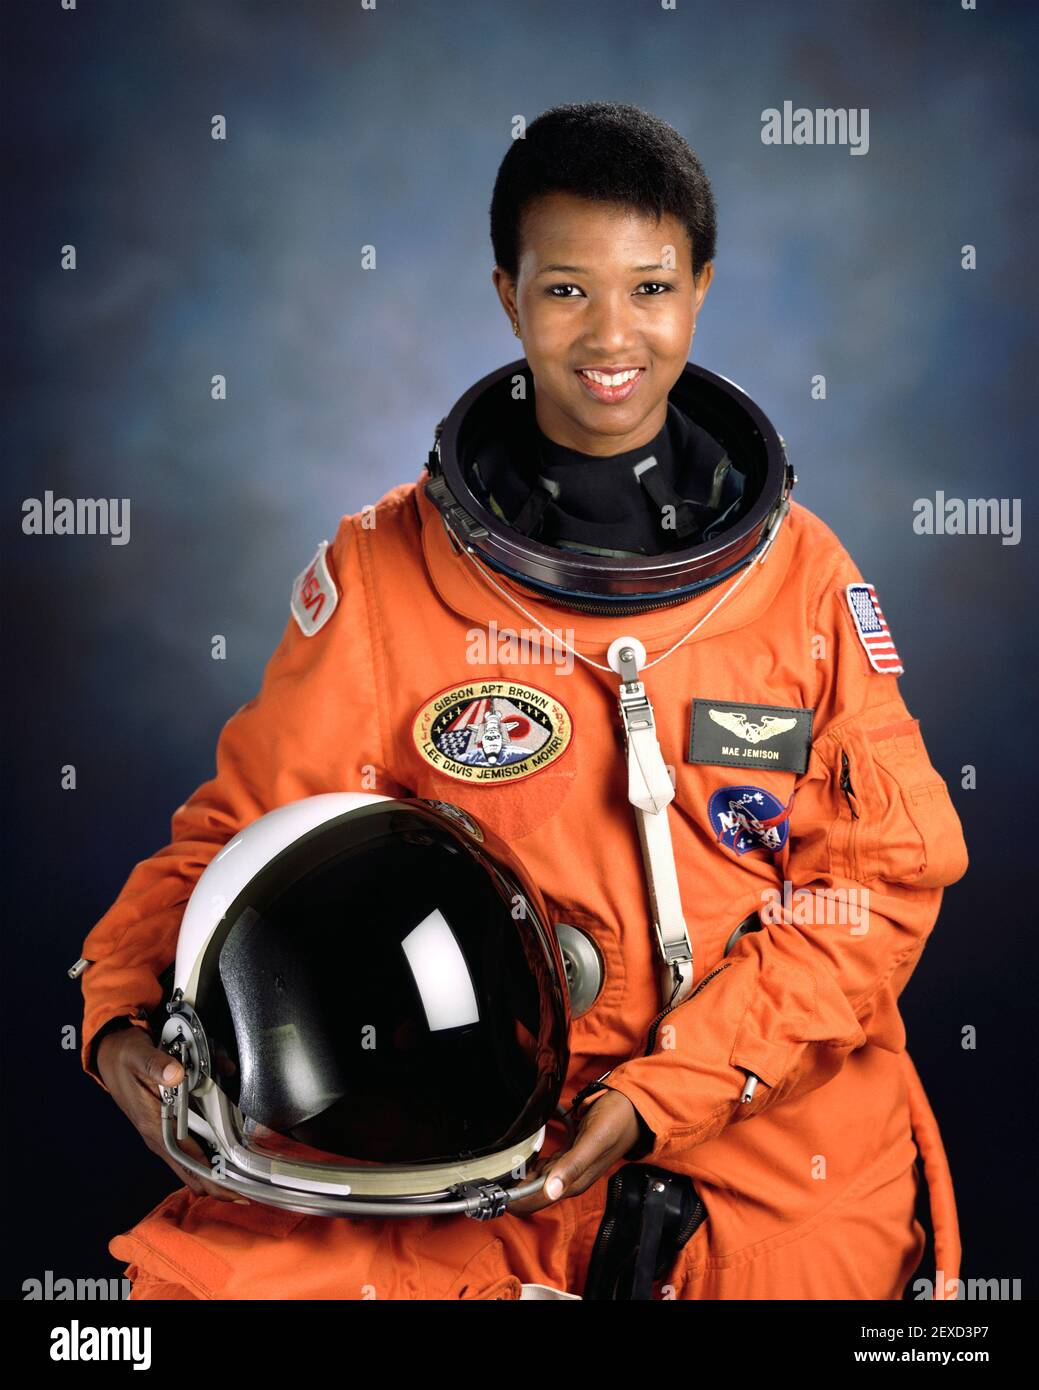 Mae Jemison. Portrait of the NASA astronaut, Mae Carol Jemison (b. 1956), the first  black woman to travel into space when she served as a mission specialist aboard the Space Shuttle Endeavour in 1992. Photo courtesy of NASA, 1992. Stock Photo